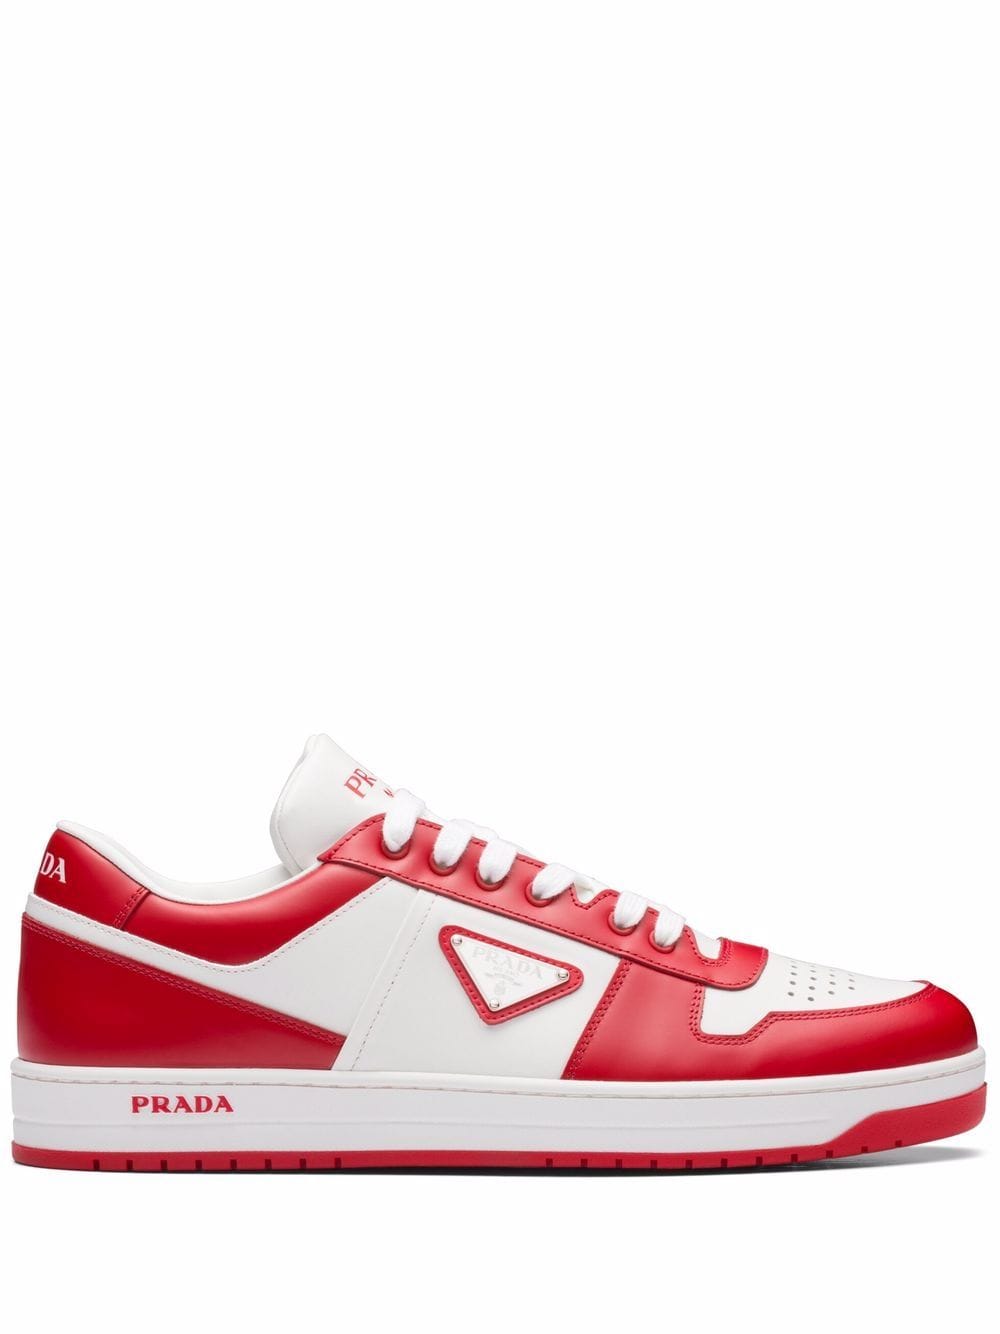 Image 1 of Prada triangle logo-patch low-top sneakers